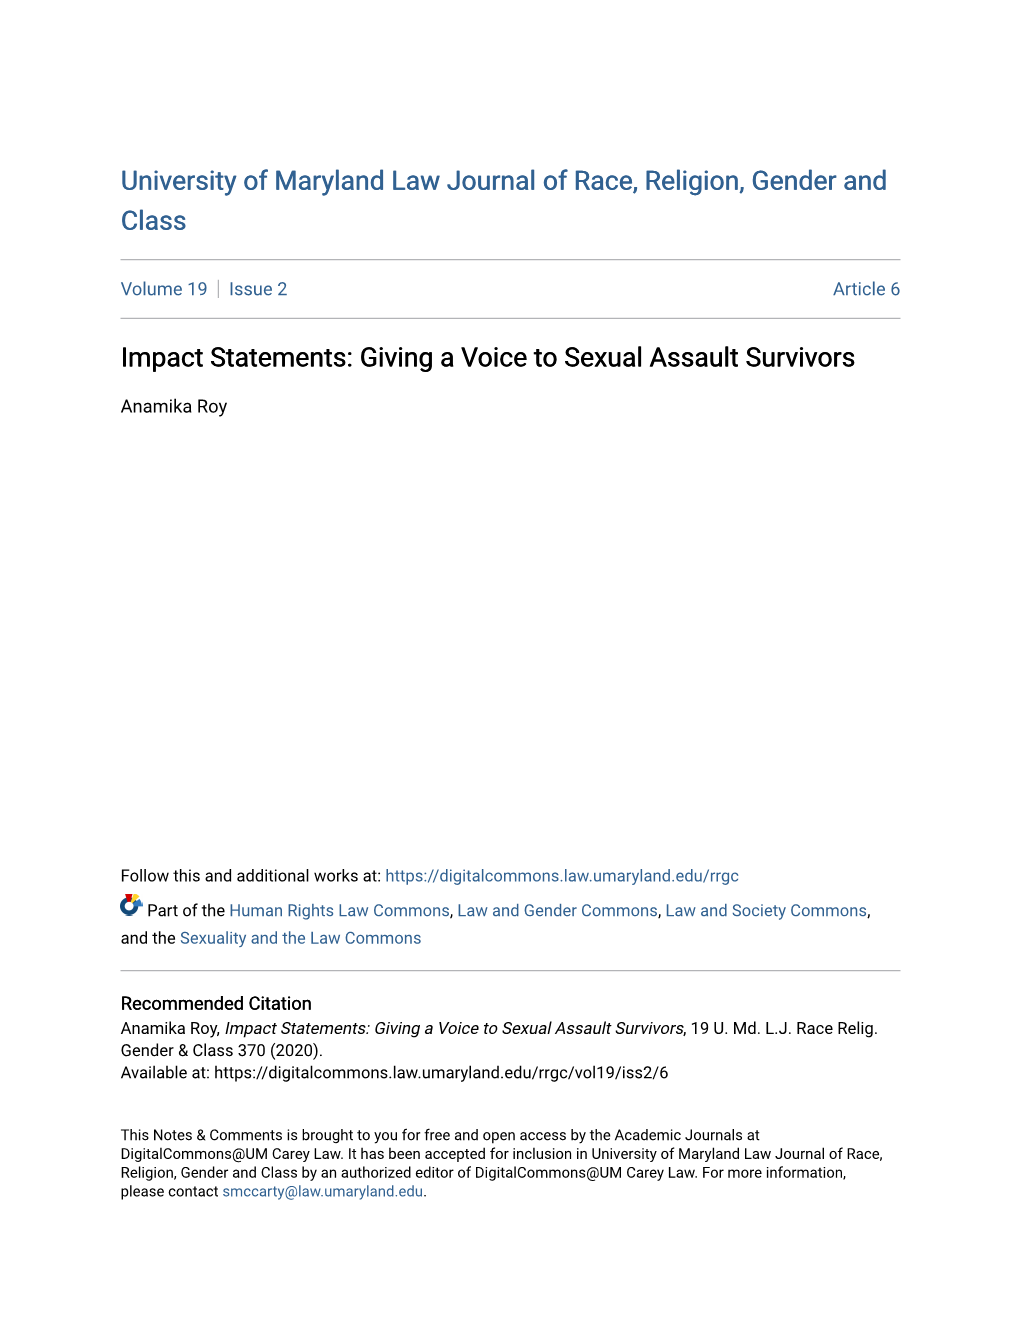 Impact Statements: Giving a Voice to Sexual Assault Survivors